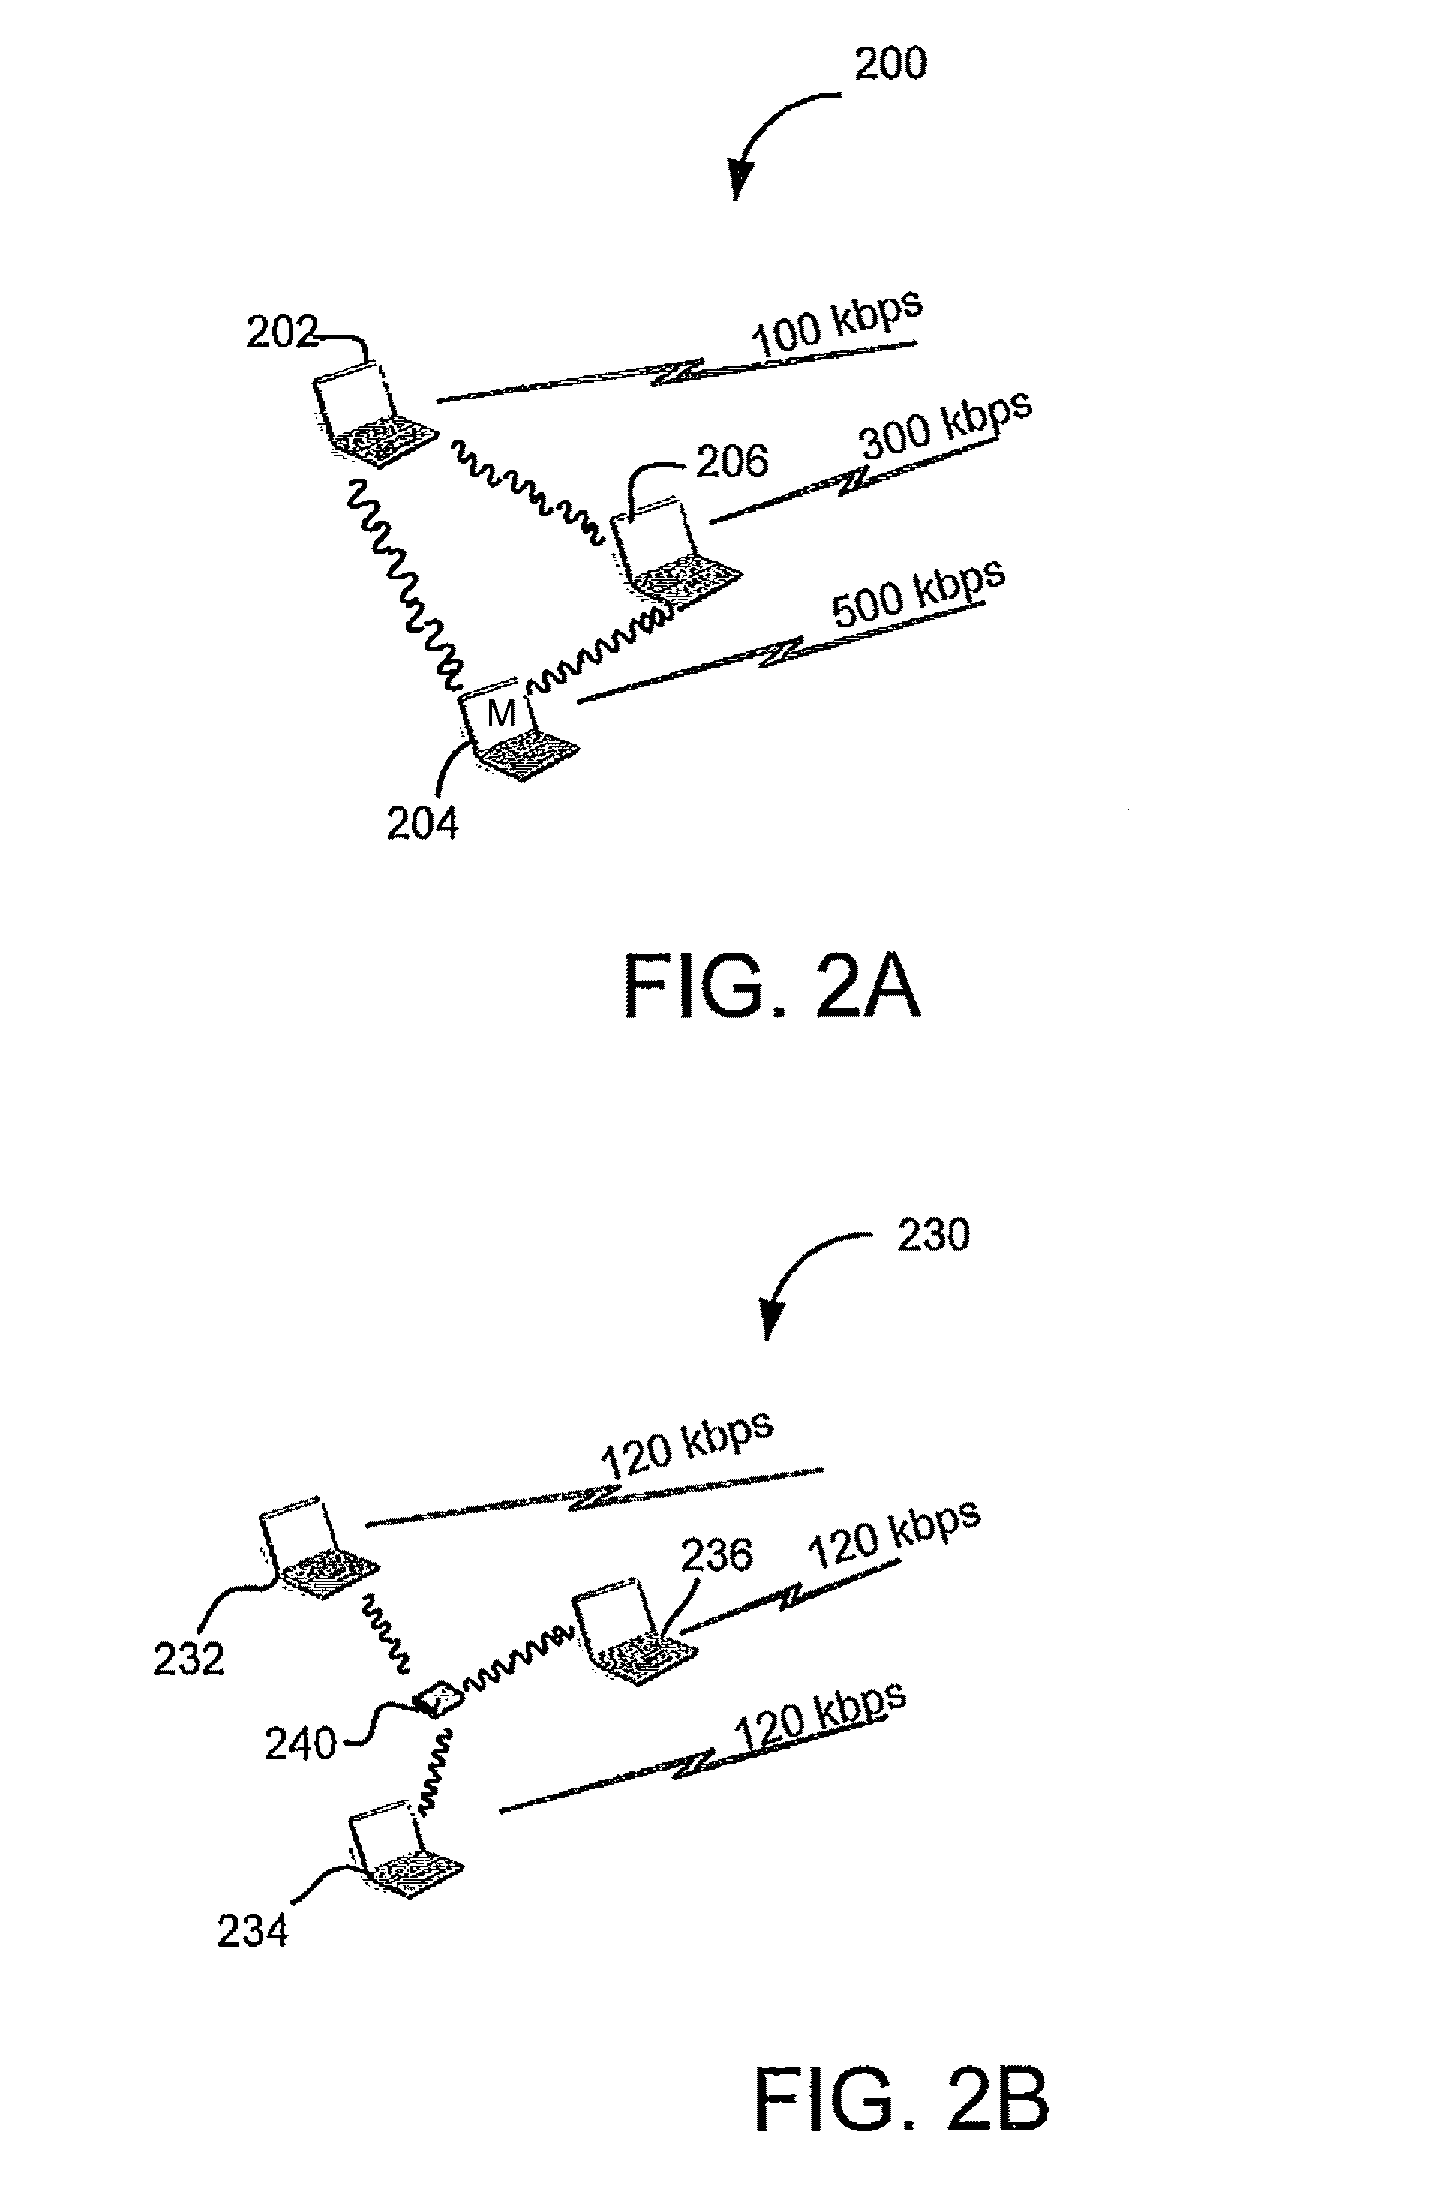 Systems and methods for dynamic aggregation of bandwidth